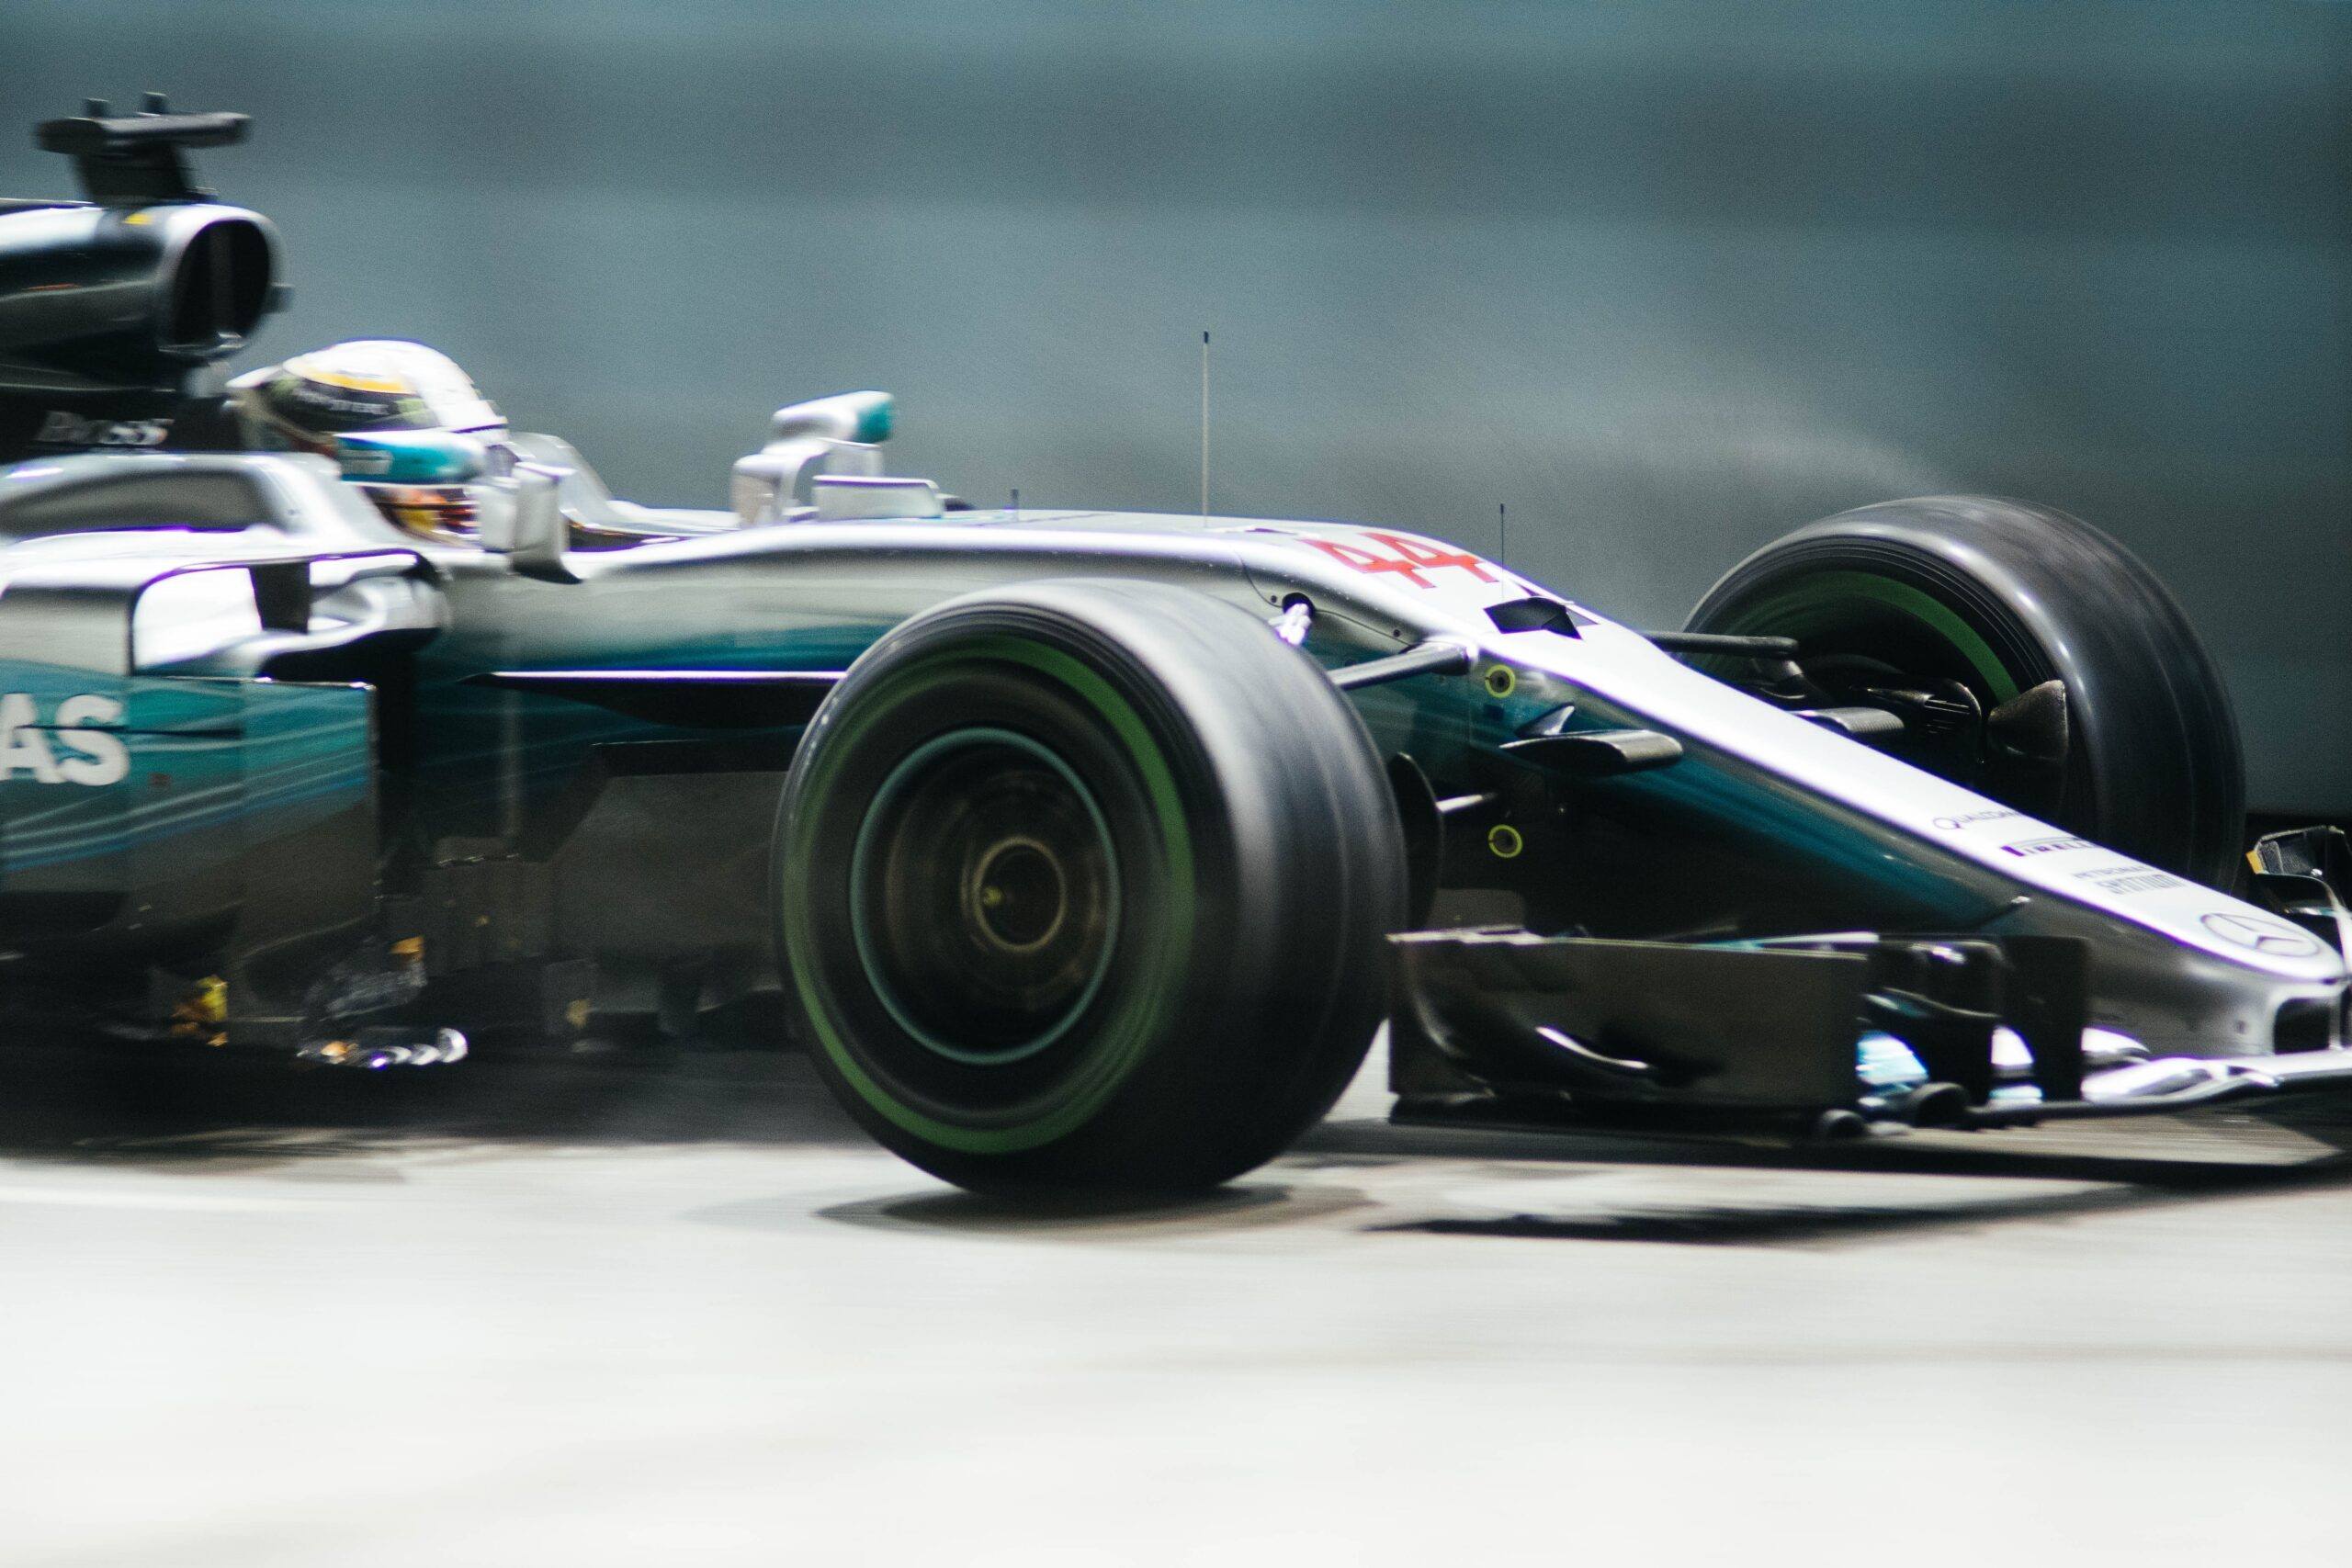 a close up view of an F1 car during a race